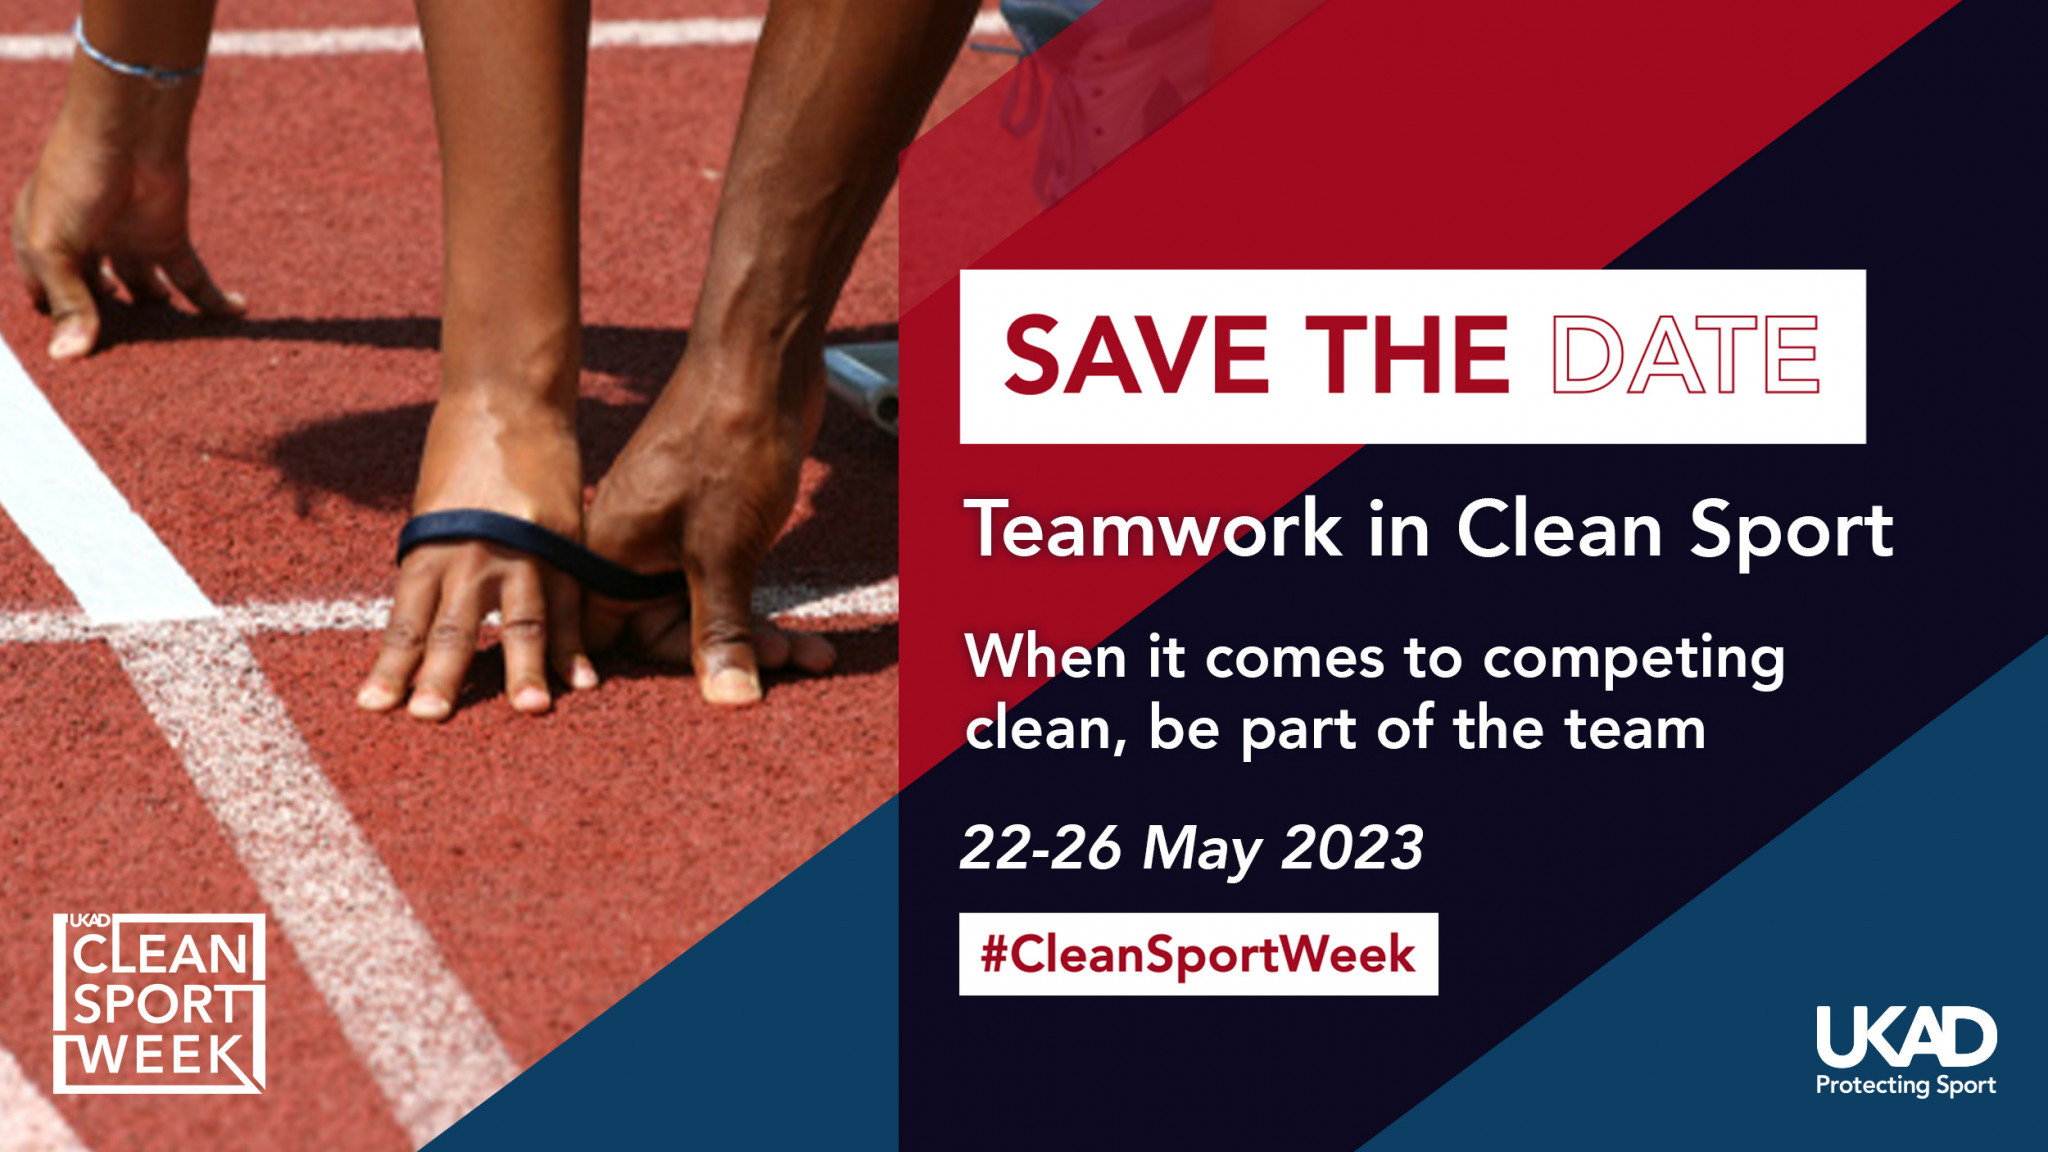 UKAD's survey comes at the beginning of Clean Sport Week ©UKAD